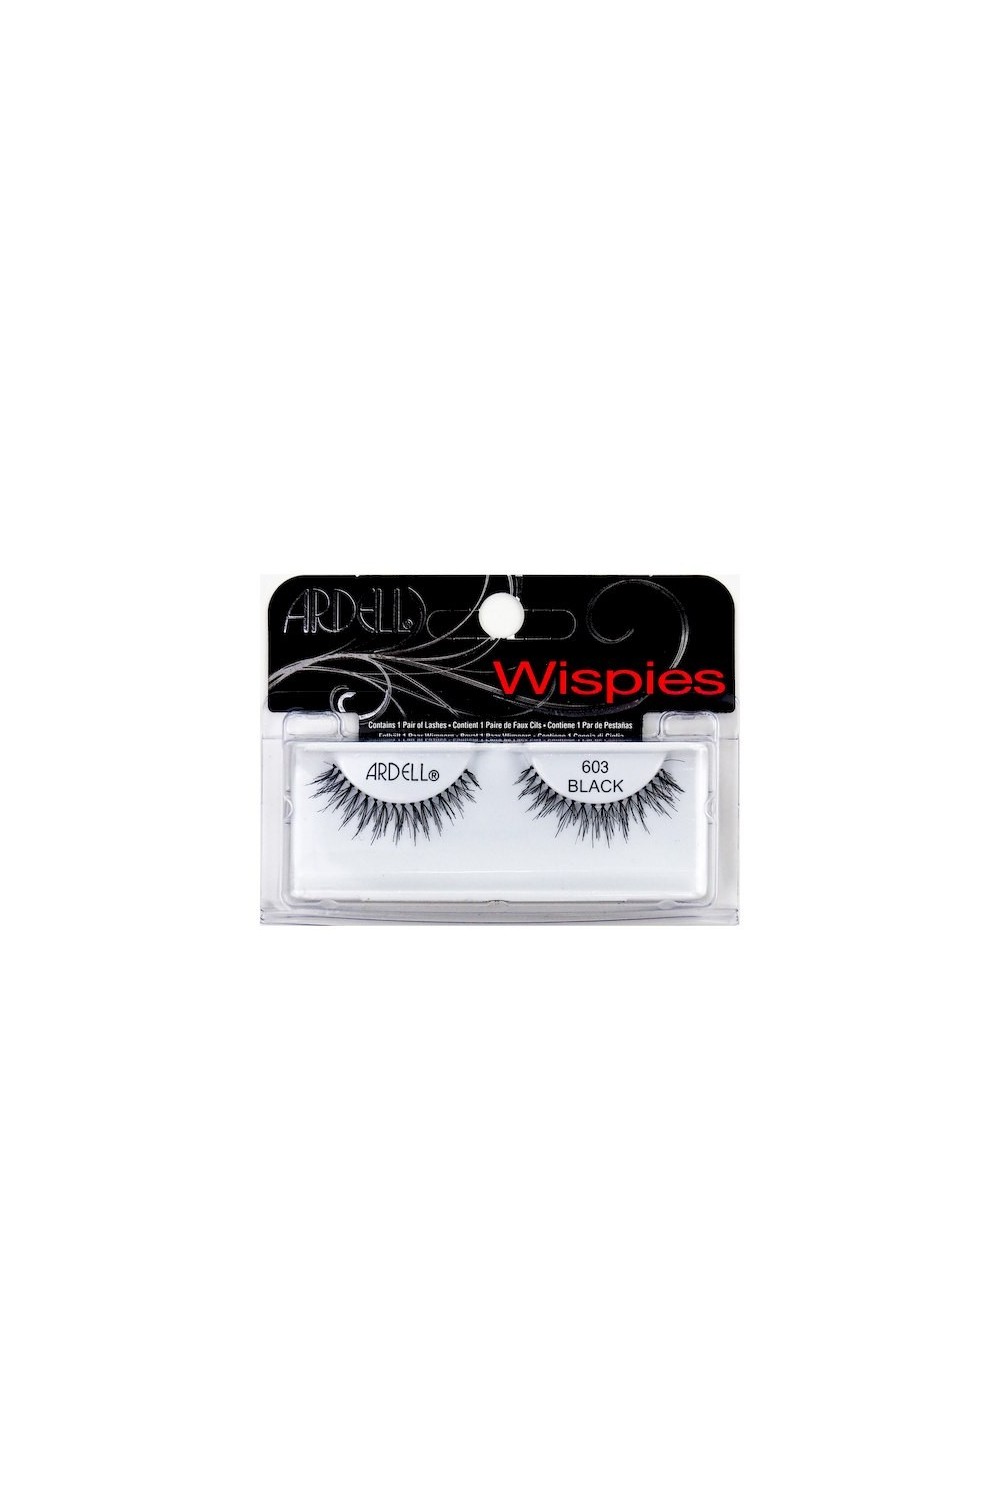 Ardell Wispies Lashes 603 Black Set 2 Pieces